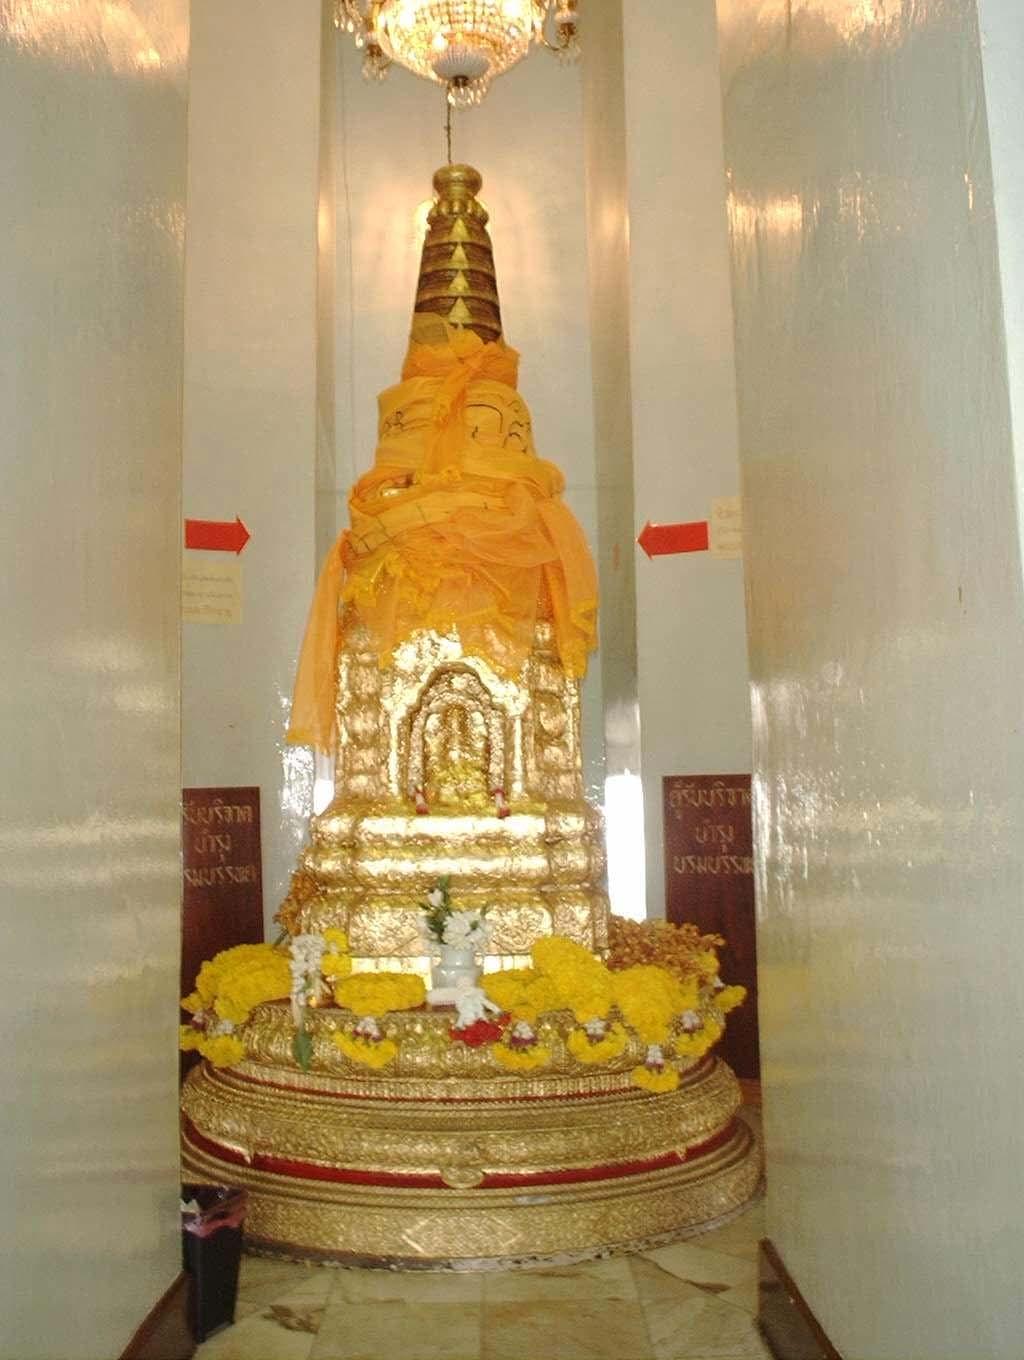 Buddha relic stupa in Bangkok: In 1898, Peppe excavated a burial mound (stupa) in the area believed to be the city of Kapilavatthu, and discovered Buddha relics in an urn inscribed with ancient